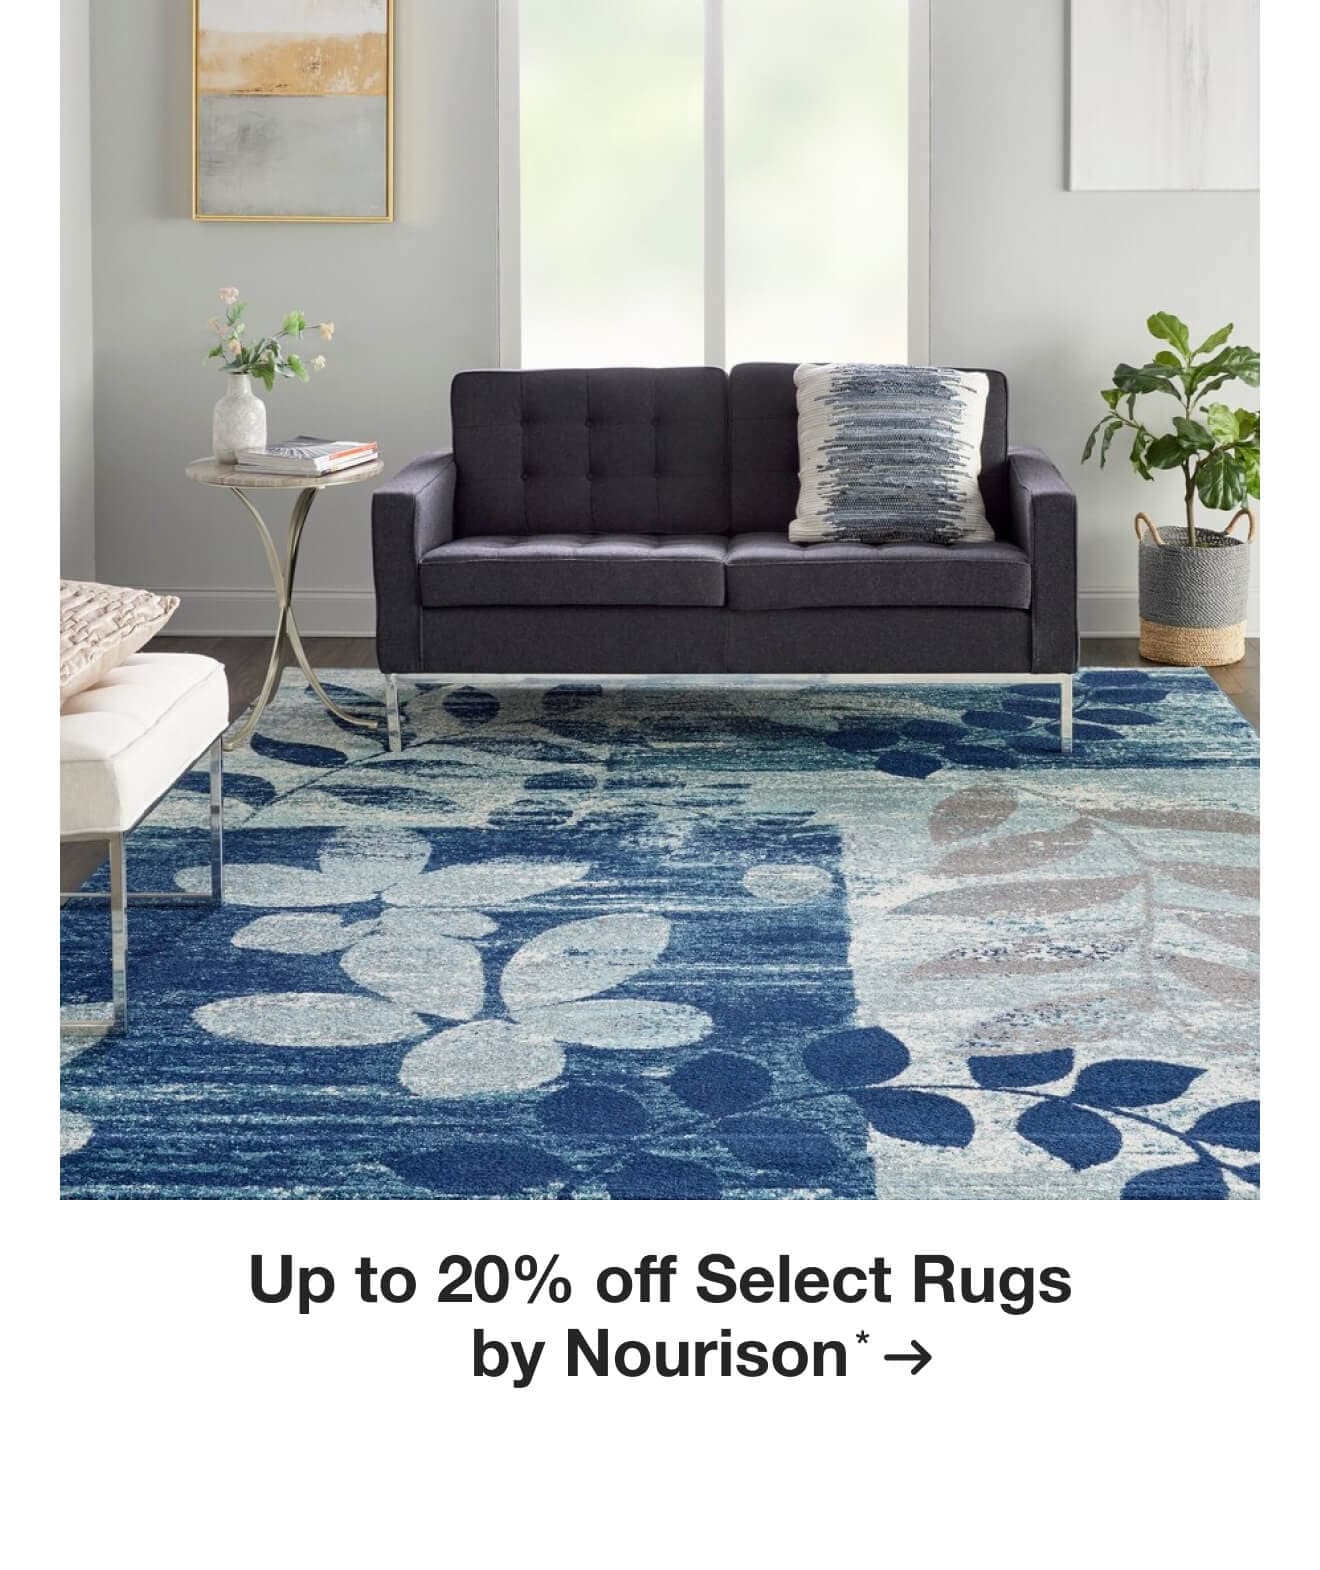 Up to 20% off Select Rugs by Nourison*